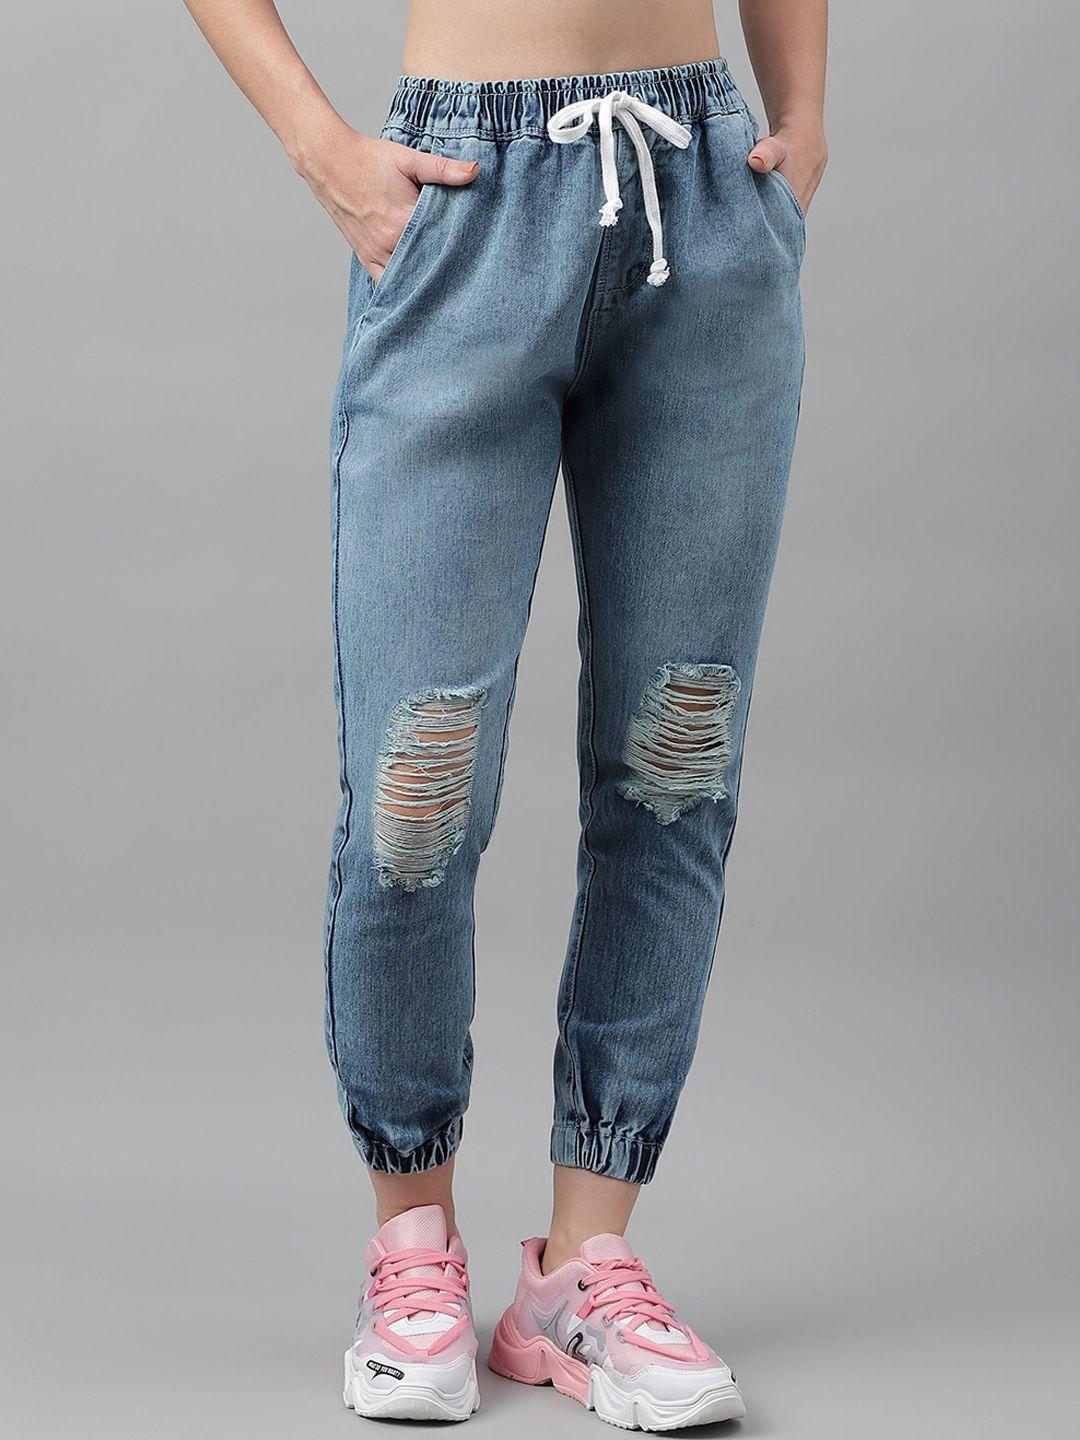 code 61 women jogger mildly distressed heavy fade jeans